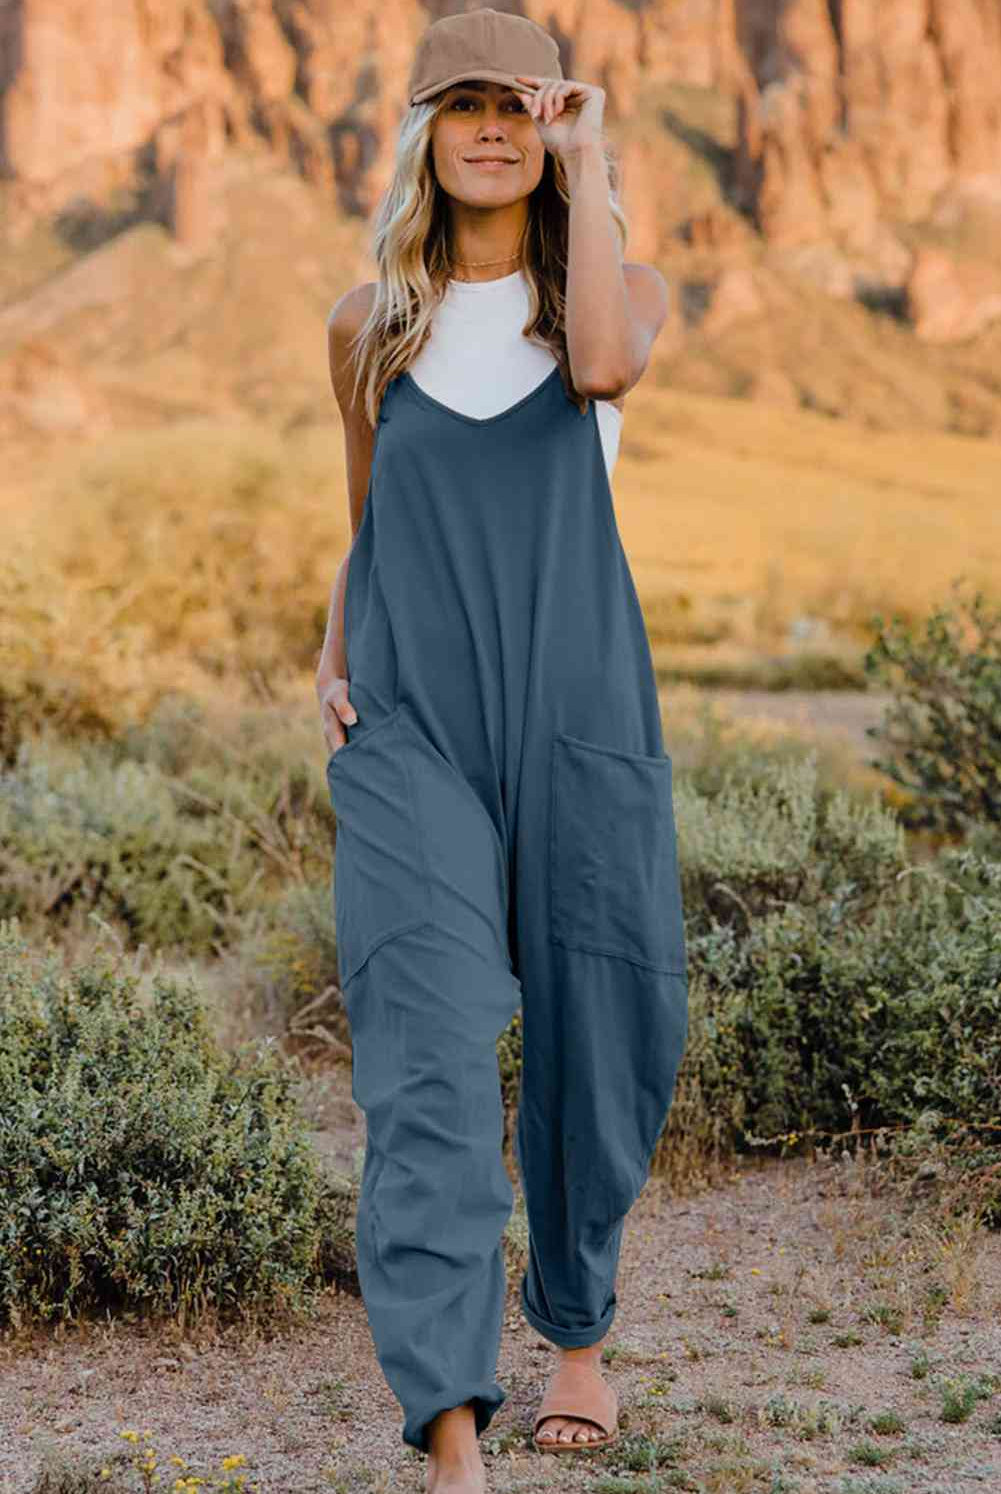 Double Take V-Neck Sleeveless Jumpsuit with Pocket - GemThreads Boutique Double Take V-Neck Sleeveless Jumpsuit with Pocket